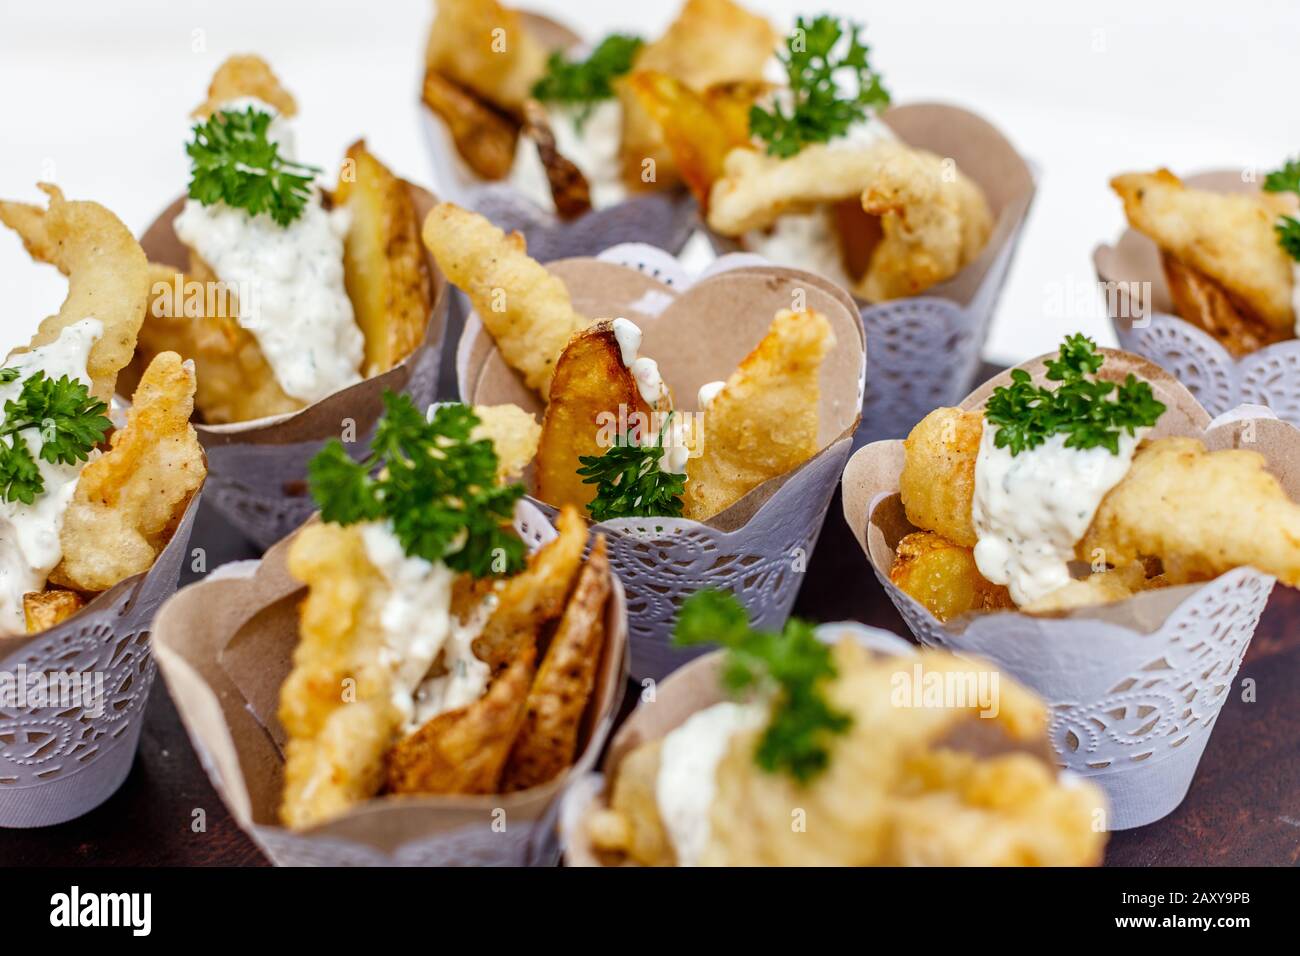 Fish and chips served in paper cones for individual serving. Decorated with parsley. Stock Photo